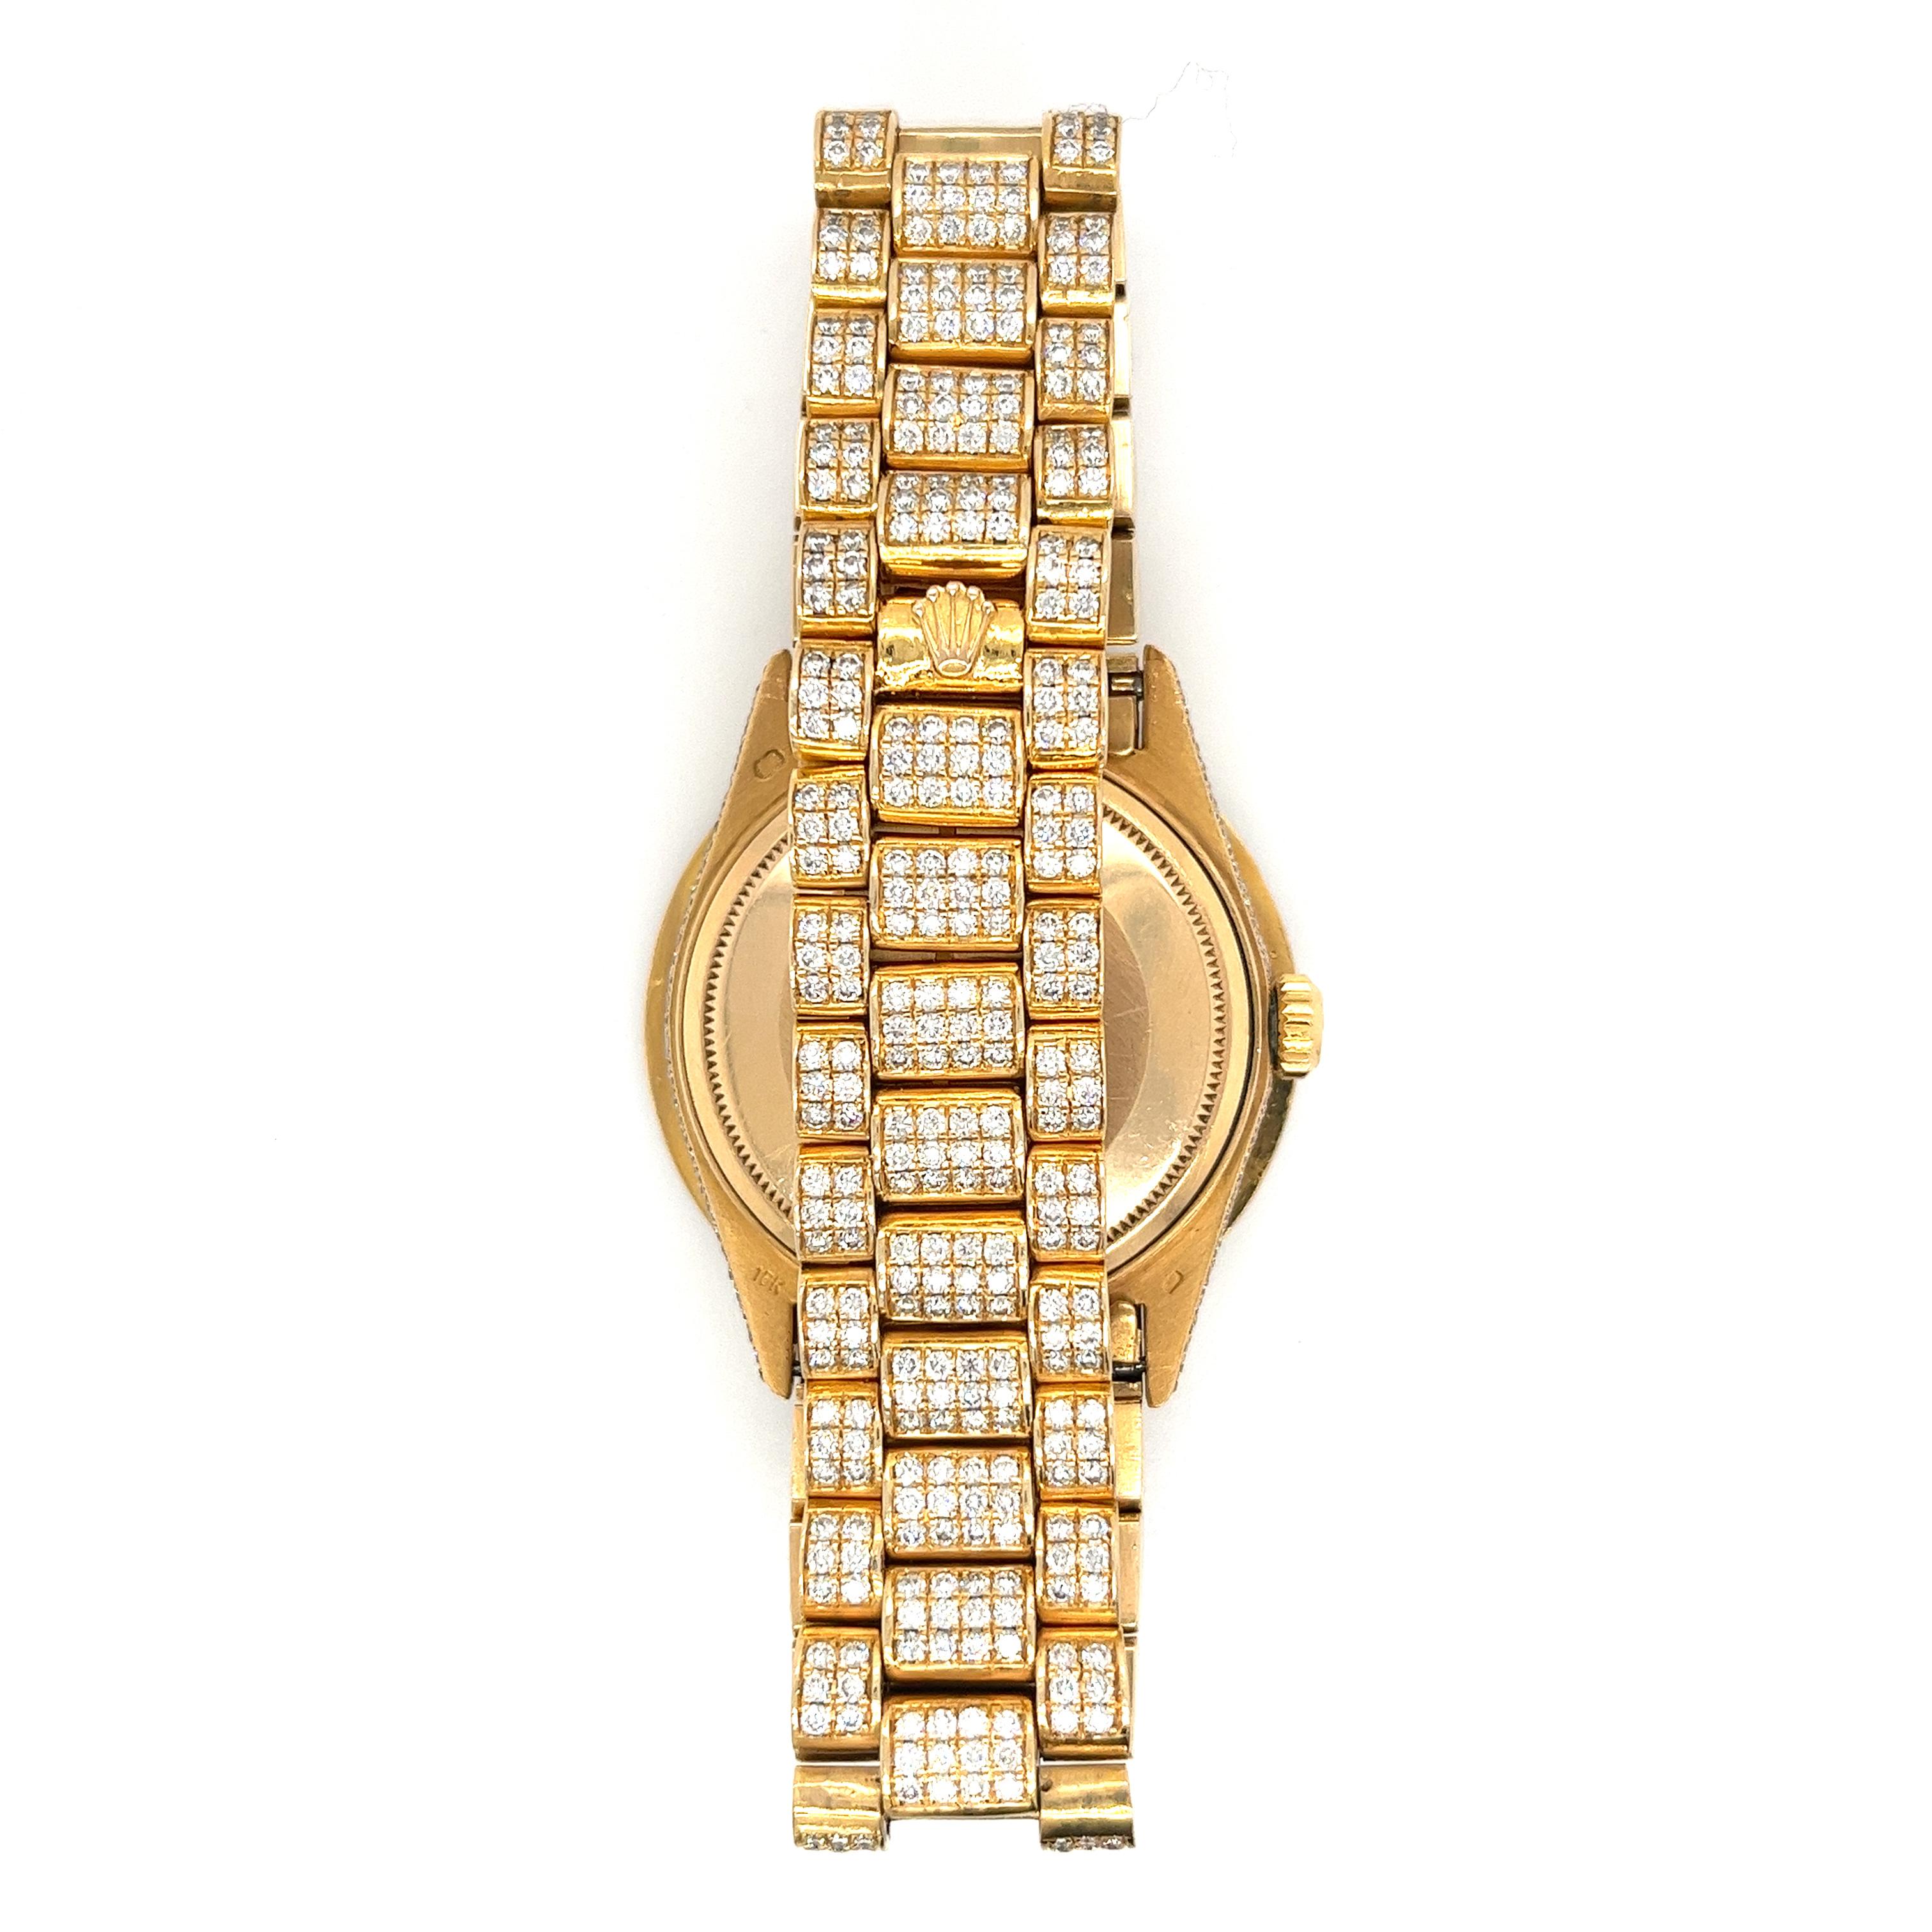 Rolex DayDate With Mother Of Pearl dial and 18k gold Rolex Presidential bracelet. The watch bears 20 carats in natural diamonds, featuring an iced-out diamond bezel, roman numeral hour markers, and a diamond bracelet. The mother of pearl dial is a